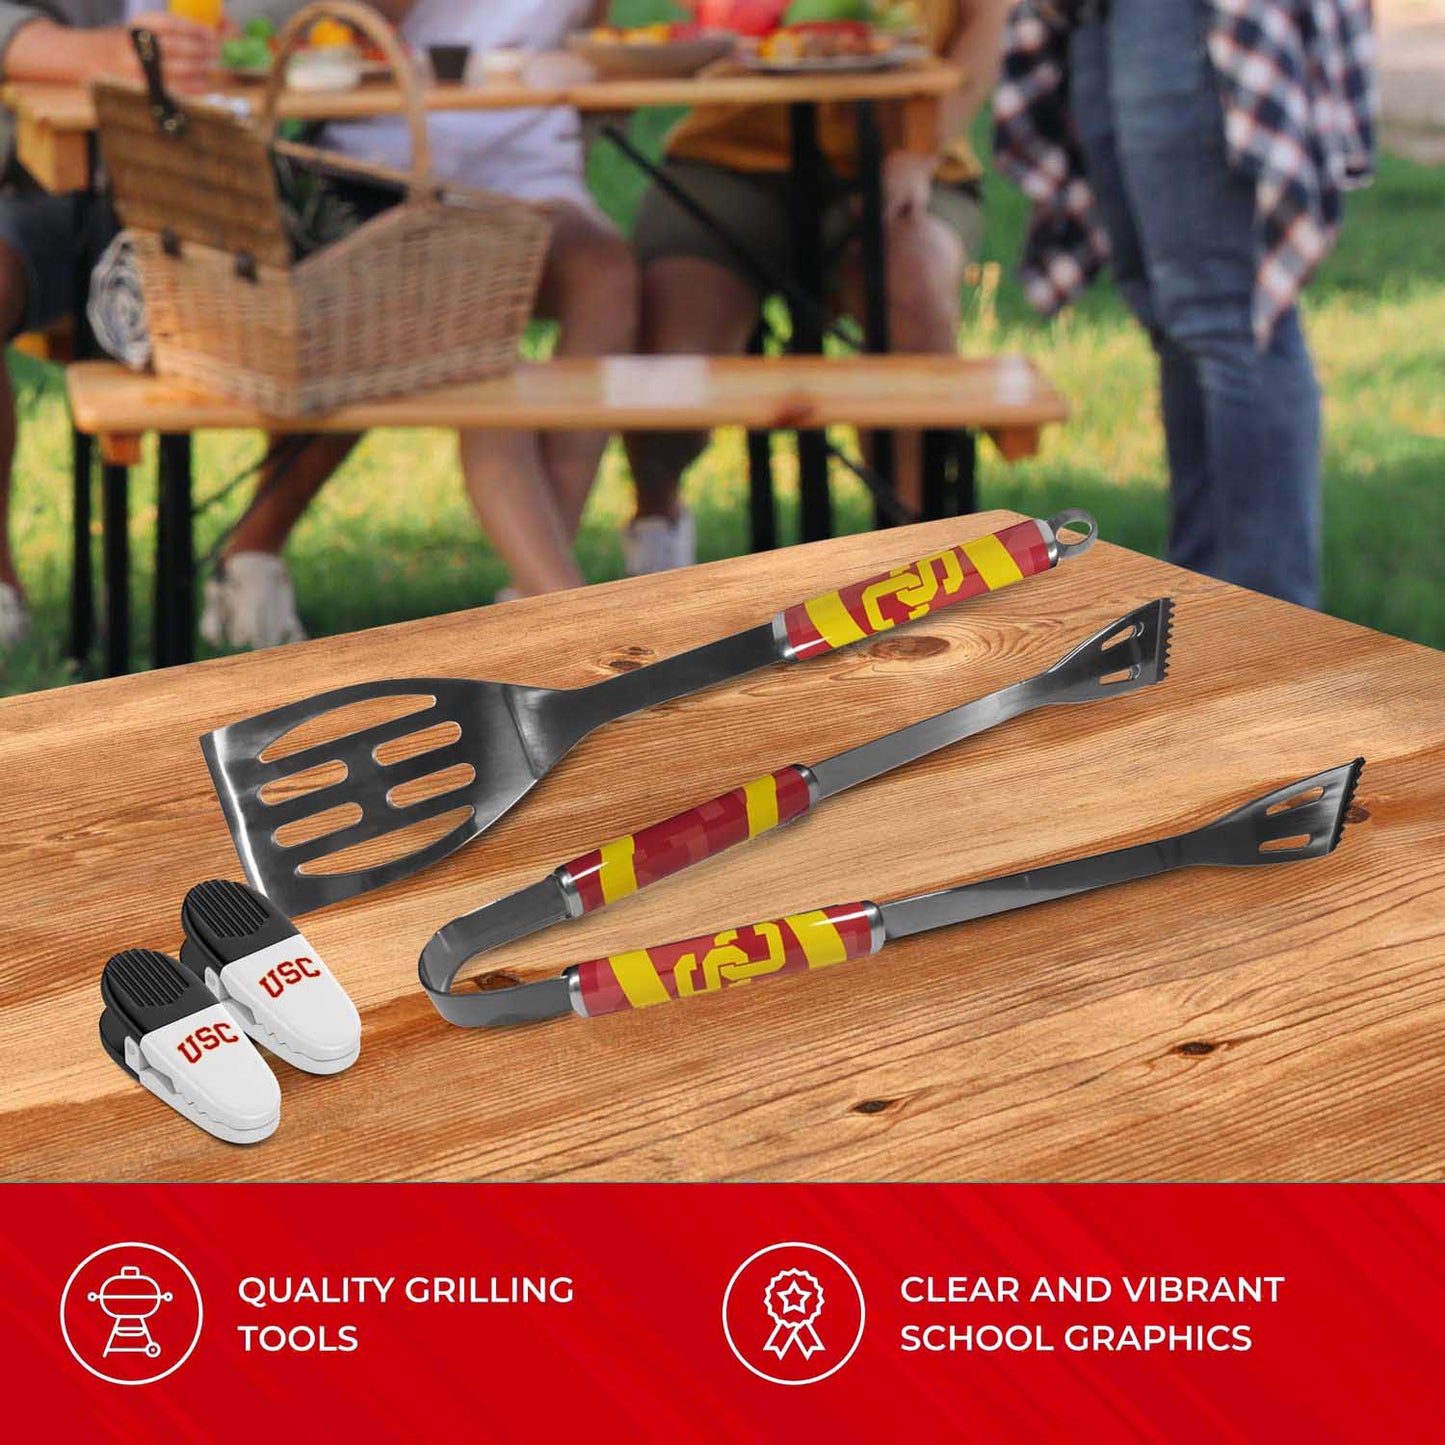 USC Trojans Collegiate University Two Piece Grilling Tools Set with 2 Magnet Chip Clips - Chrome